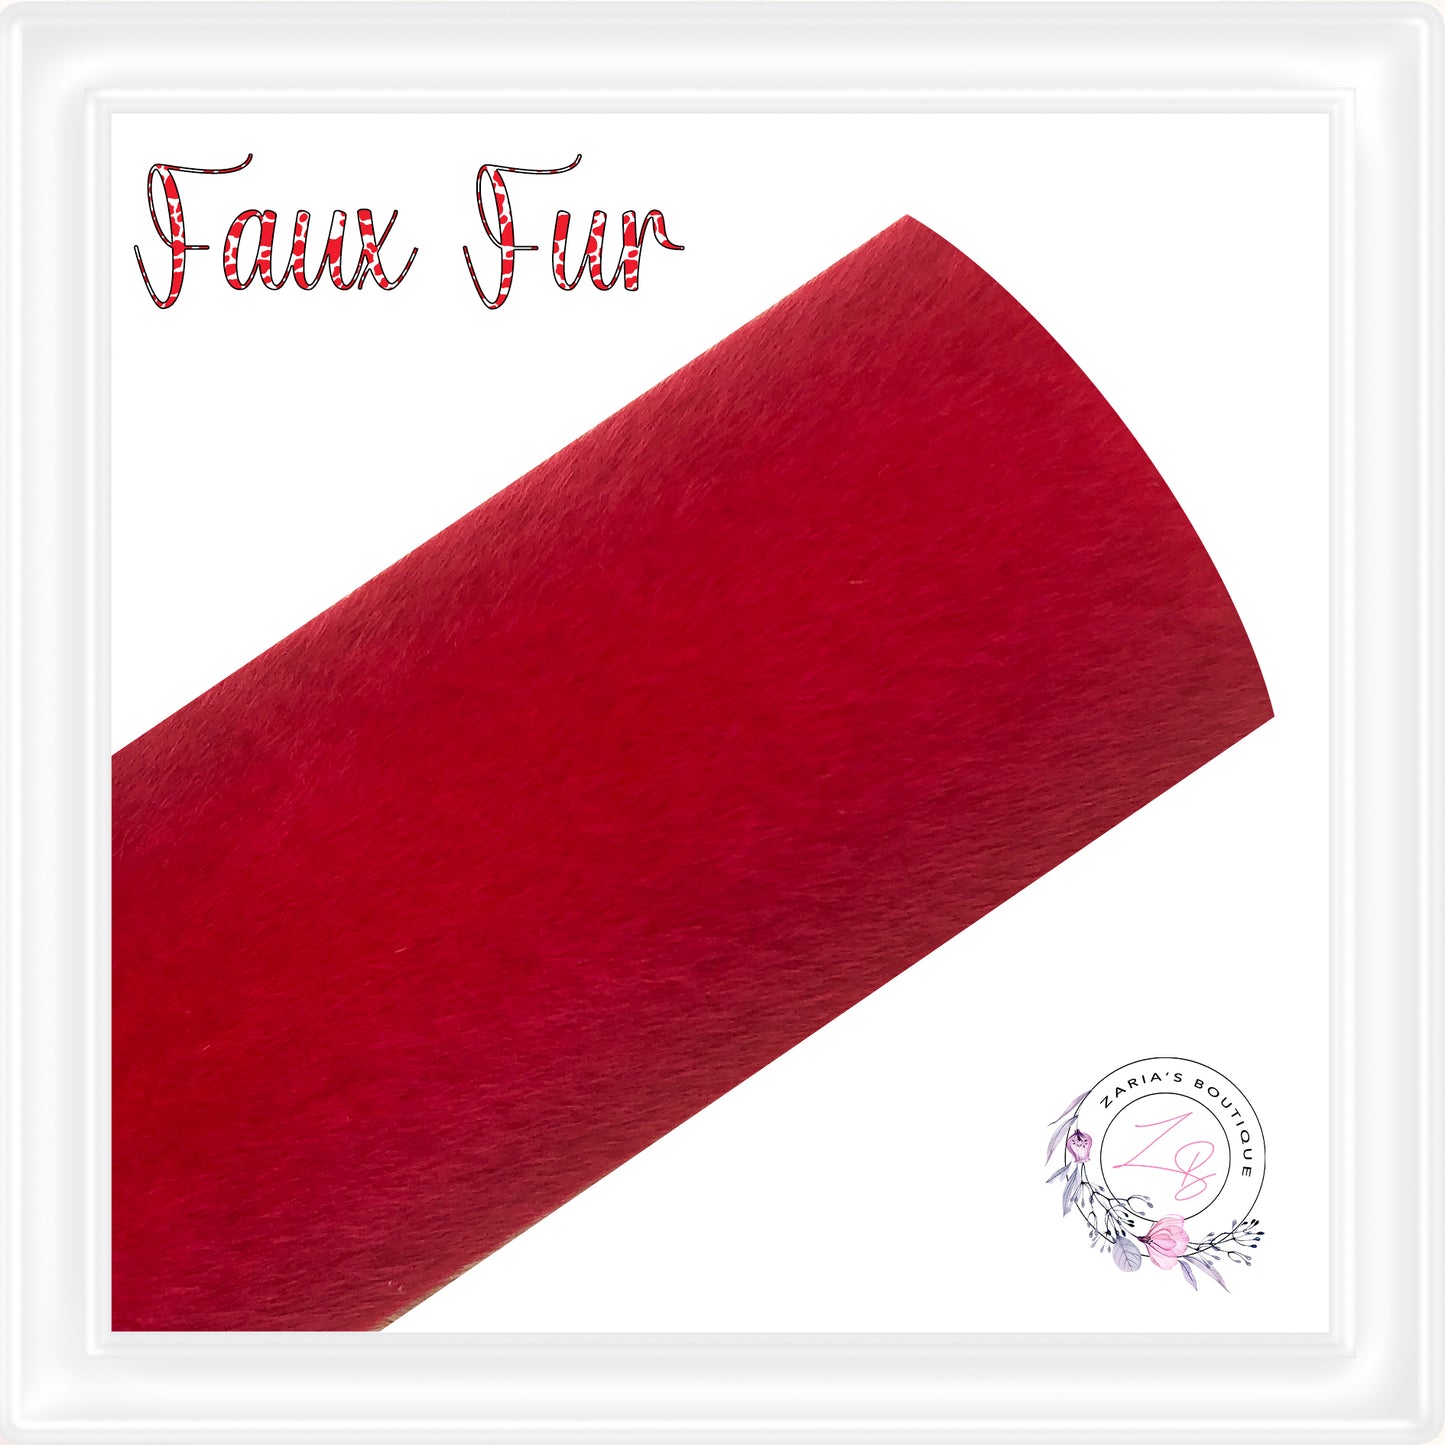 ⋅ Faux Fur ⋅ Horse Hair Textured Bow & Craft Fabric ⋅ Red ⋅